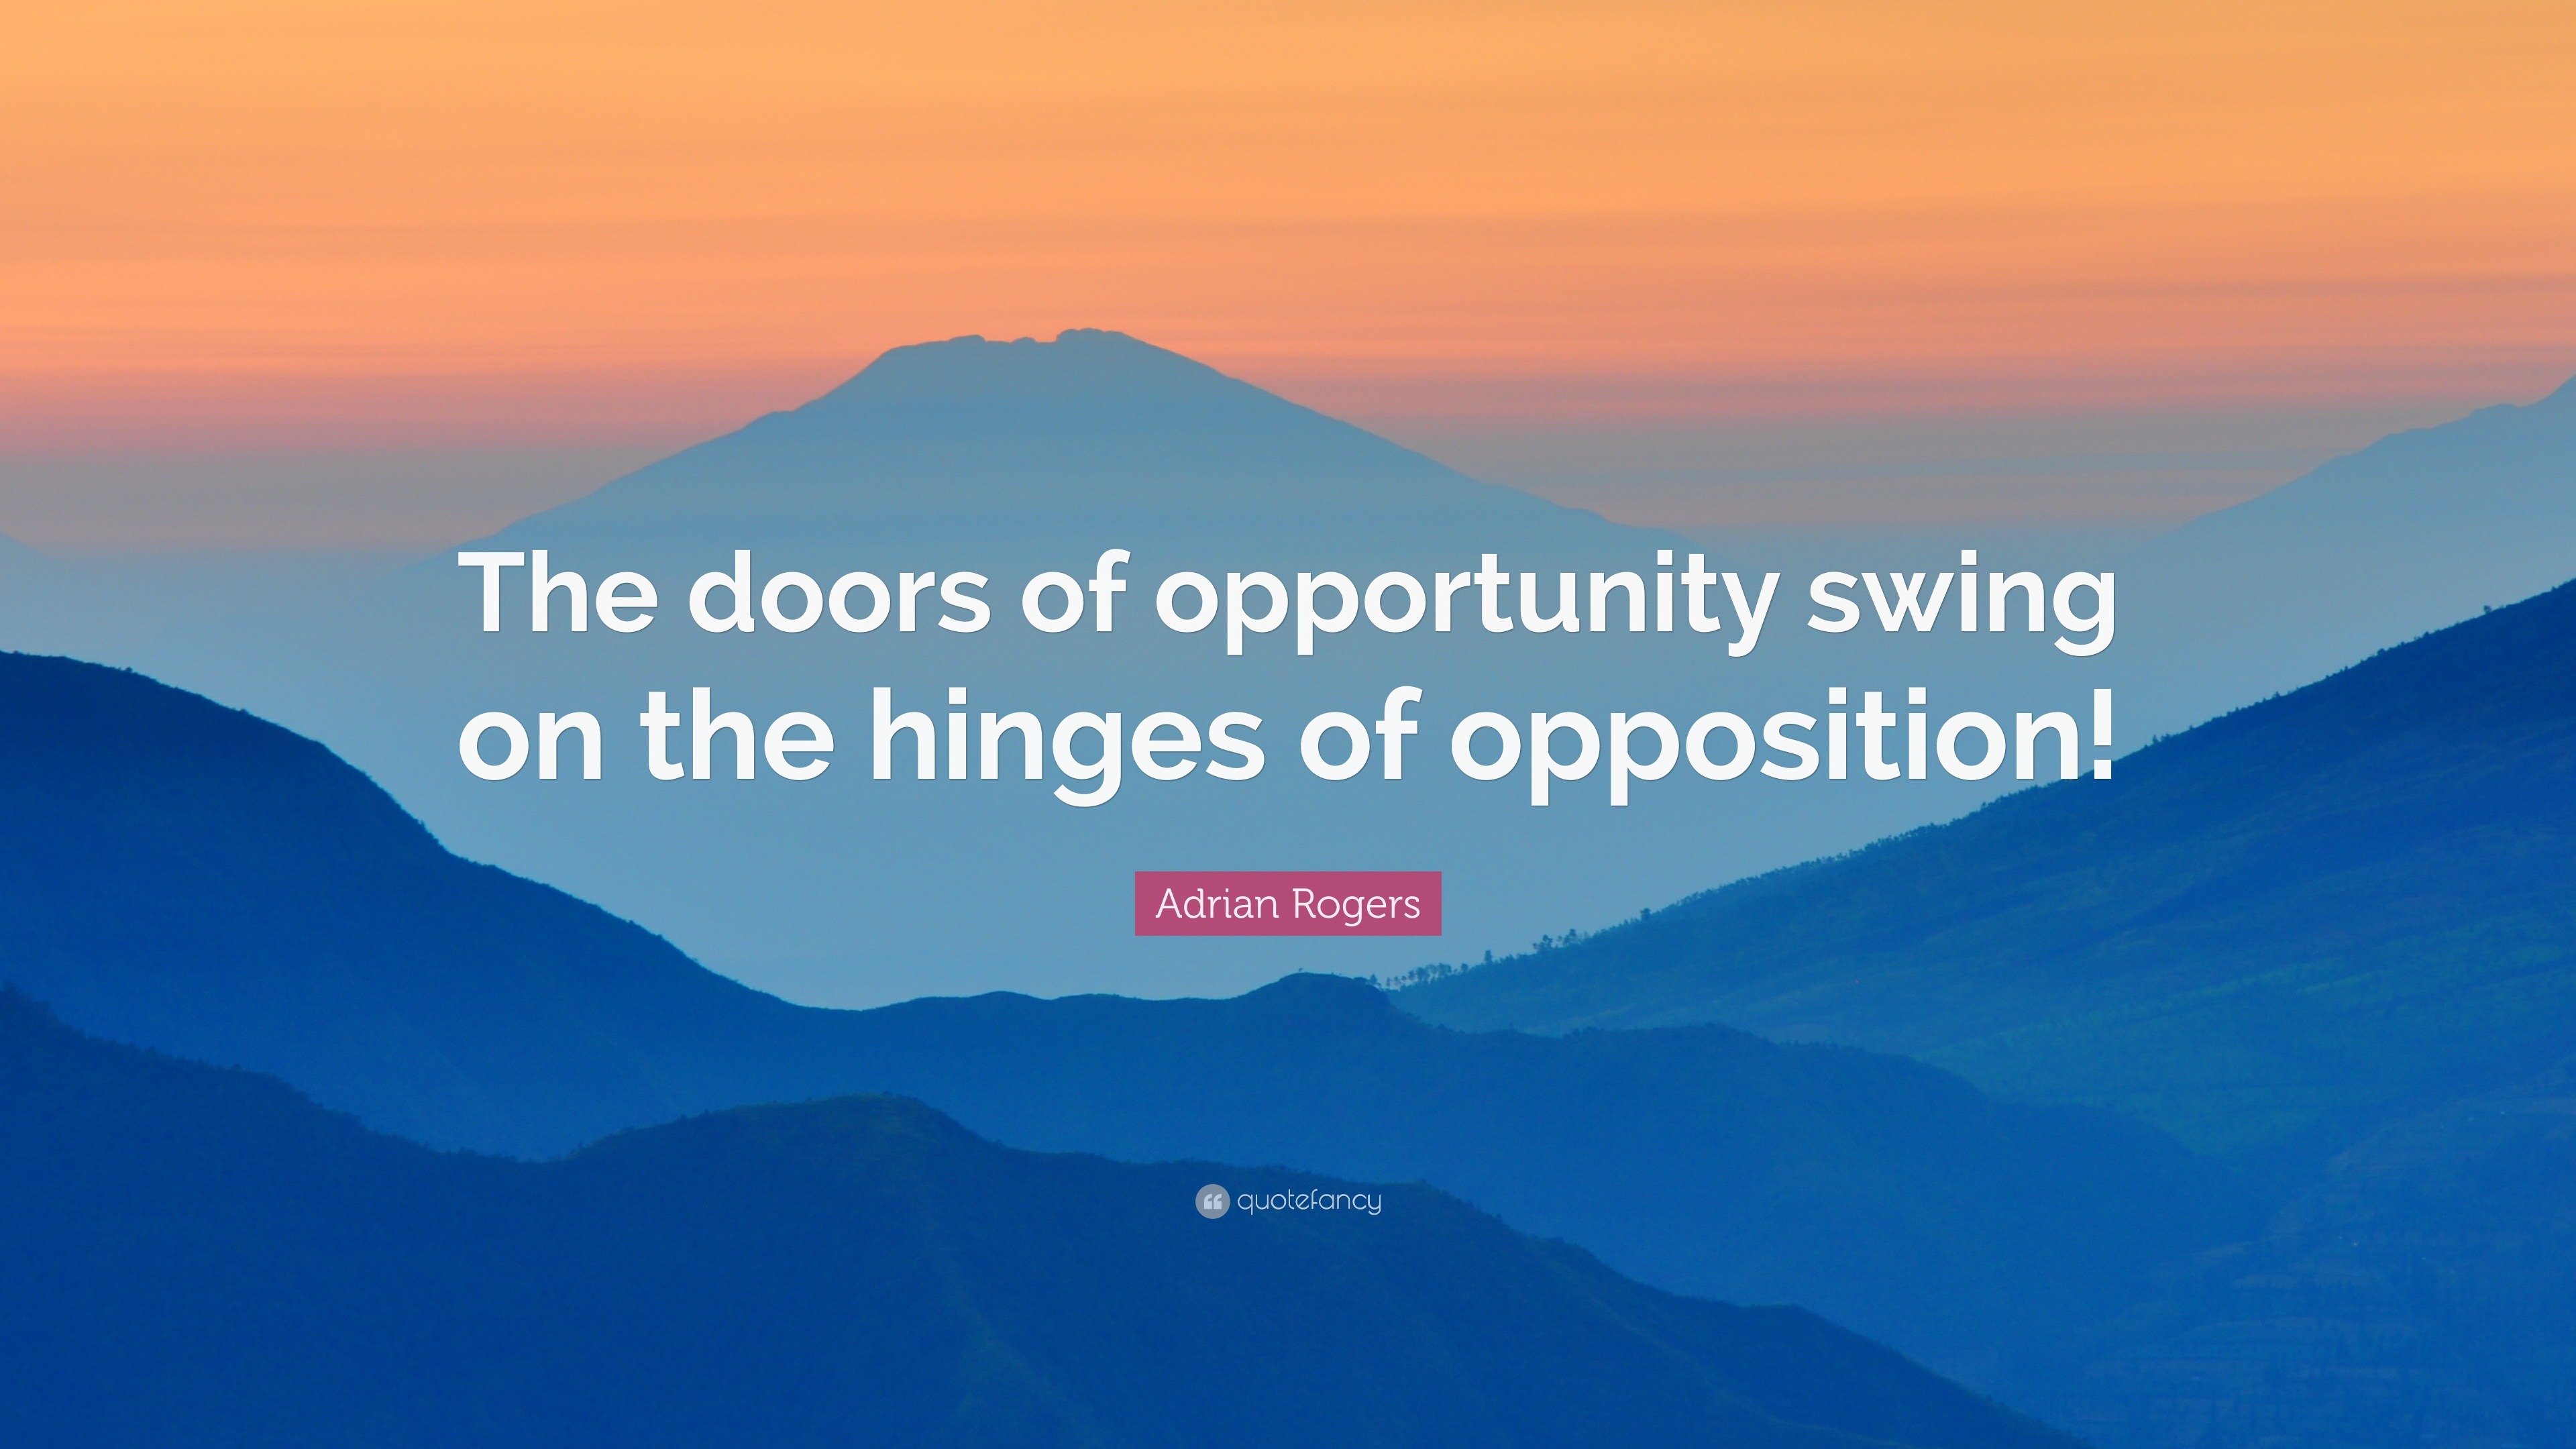 799602 Adrian Rogers Quote The doors of opportunity swing on the hinges